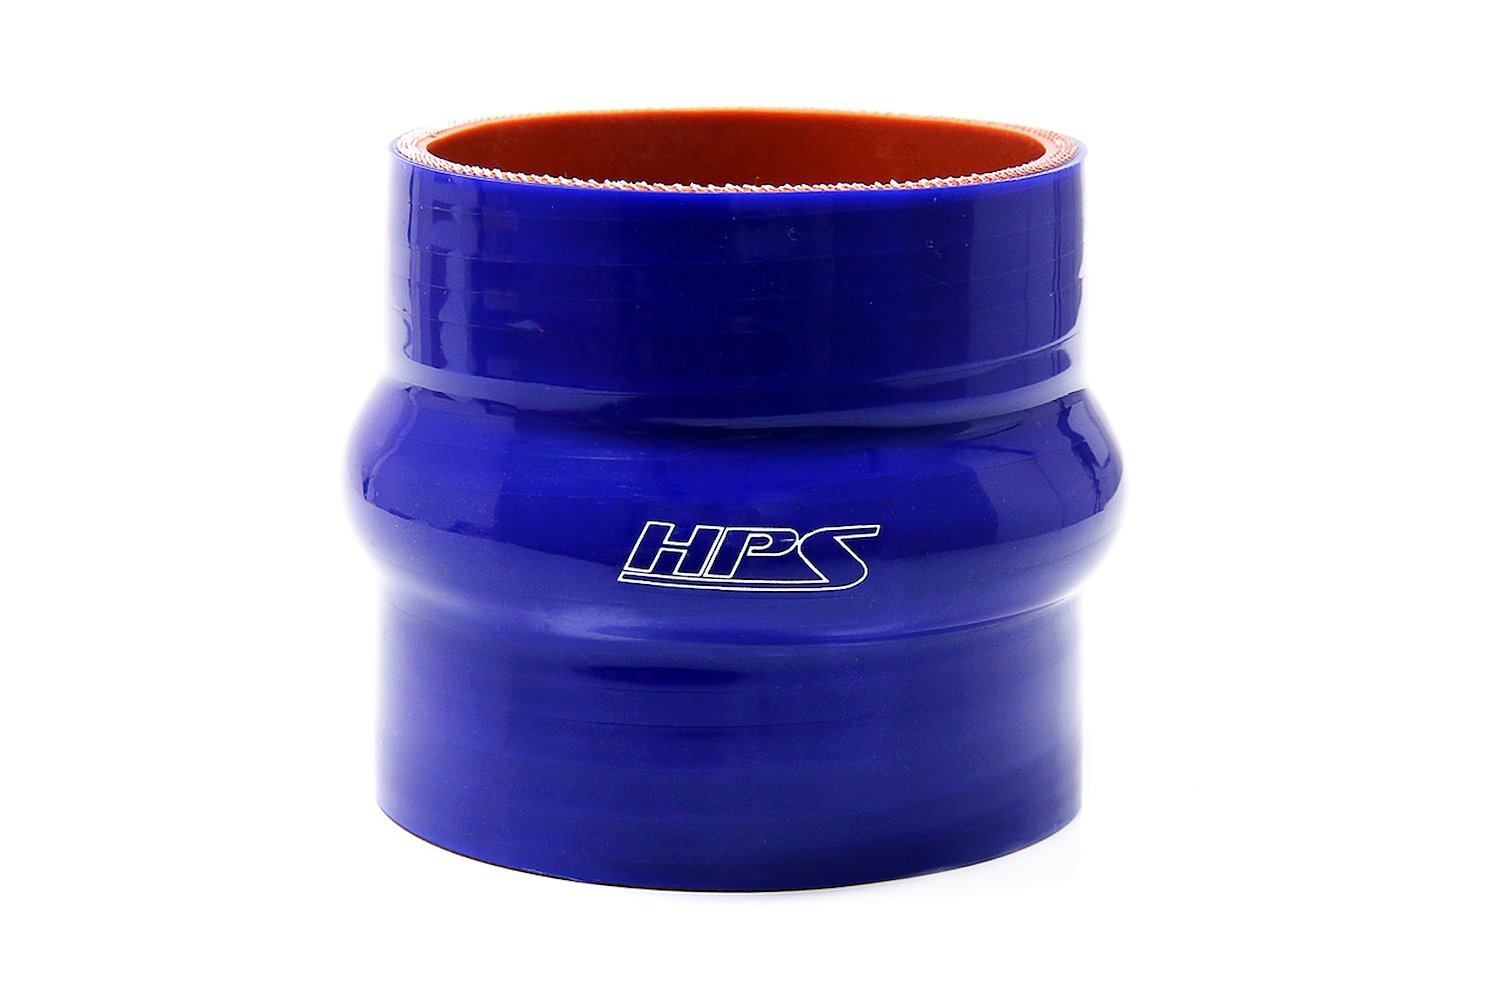 HTSHC-450-L6-BLUE Silicone Hump Coupler Hose, High-Temp 4-Ply Reinforced, 4-1/2 in. ID, 6 in. Long, Blue